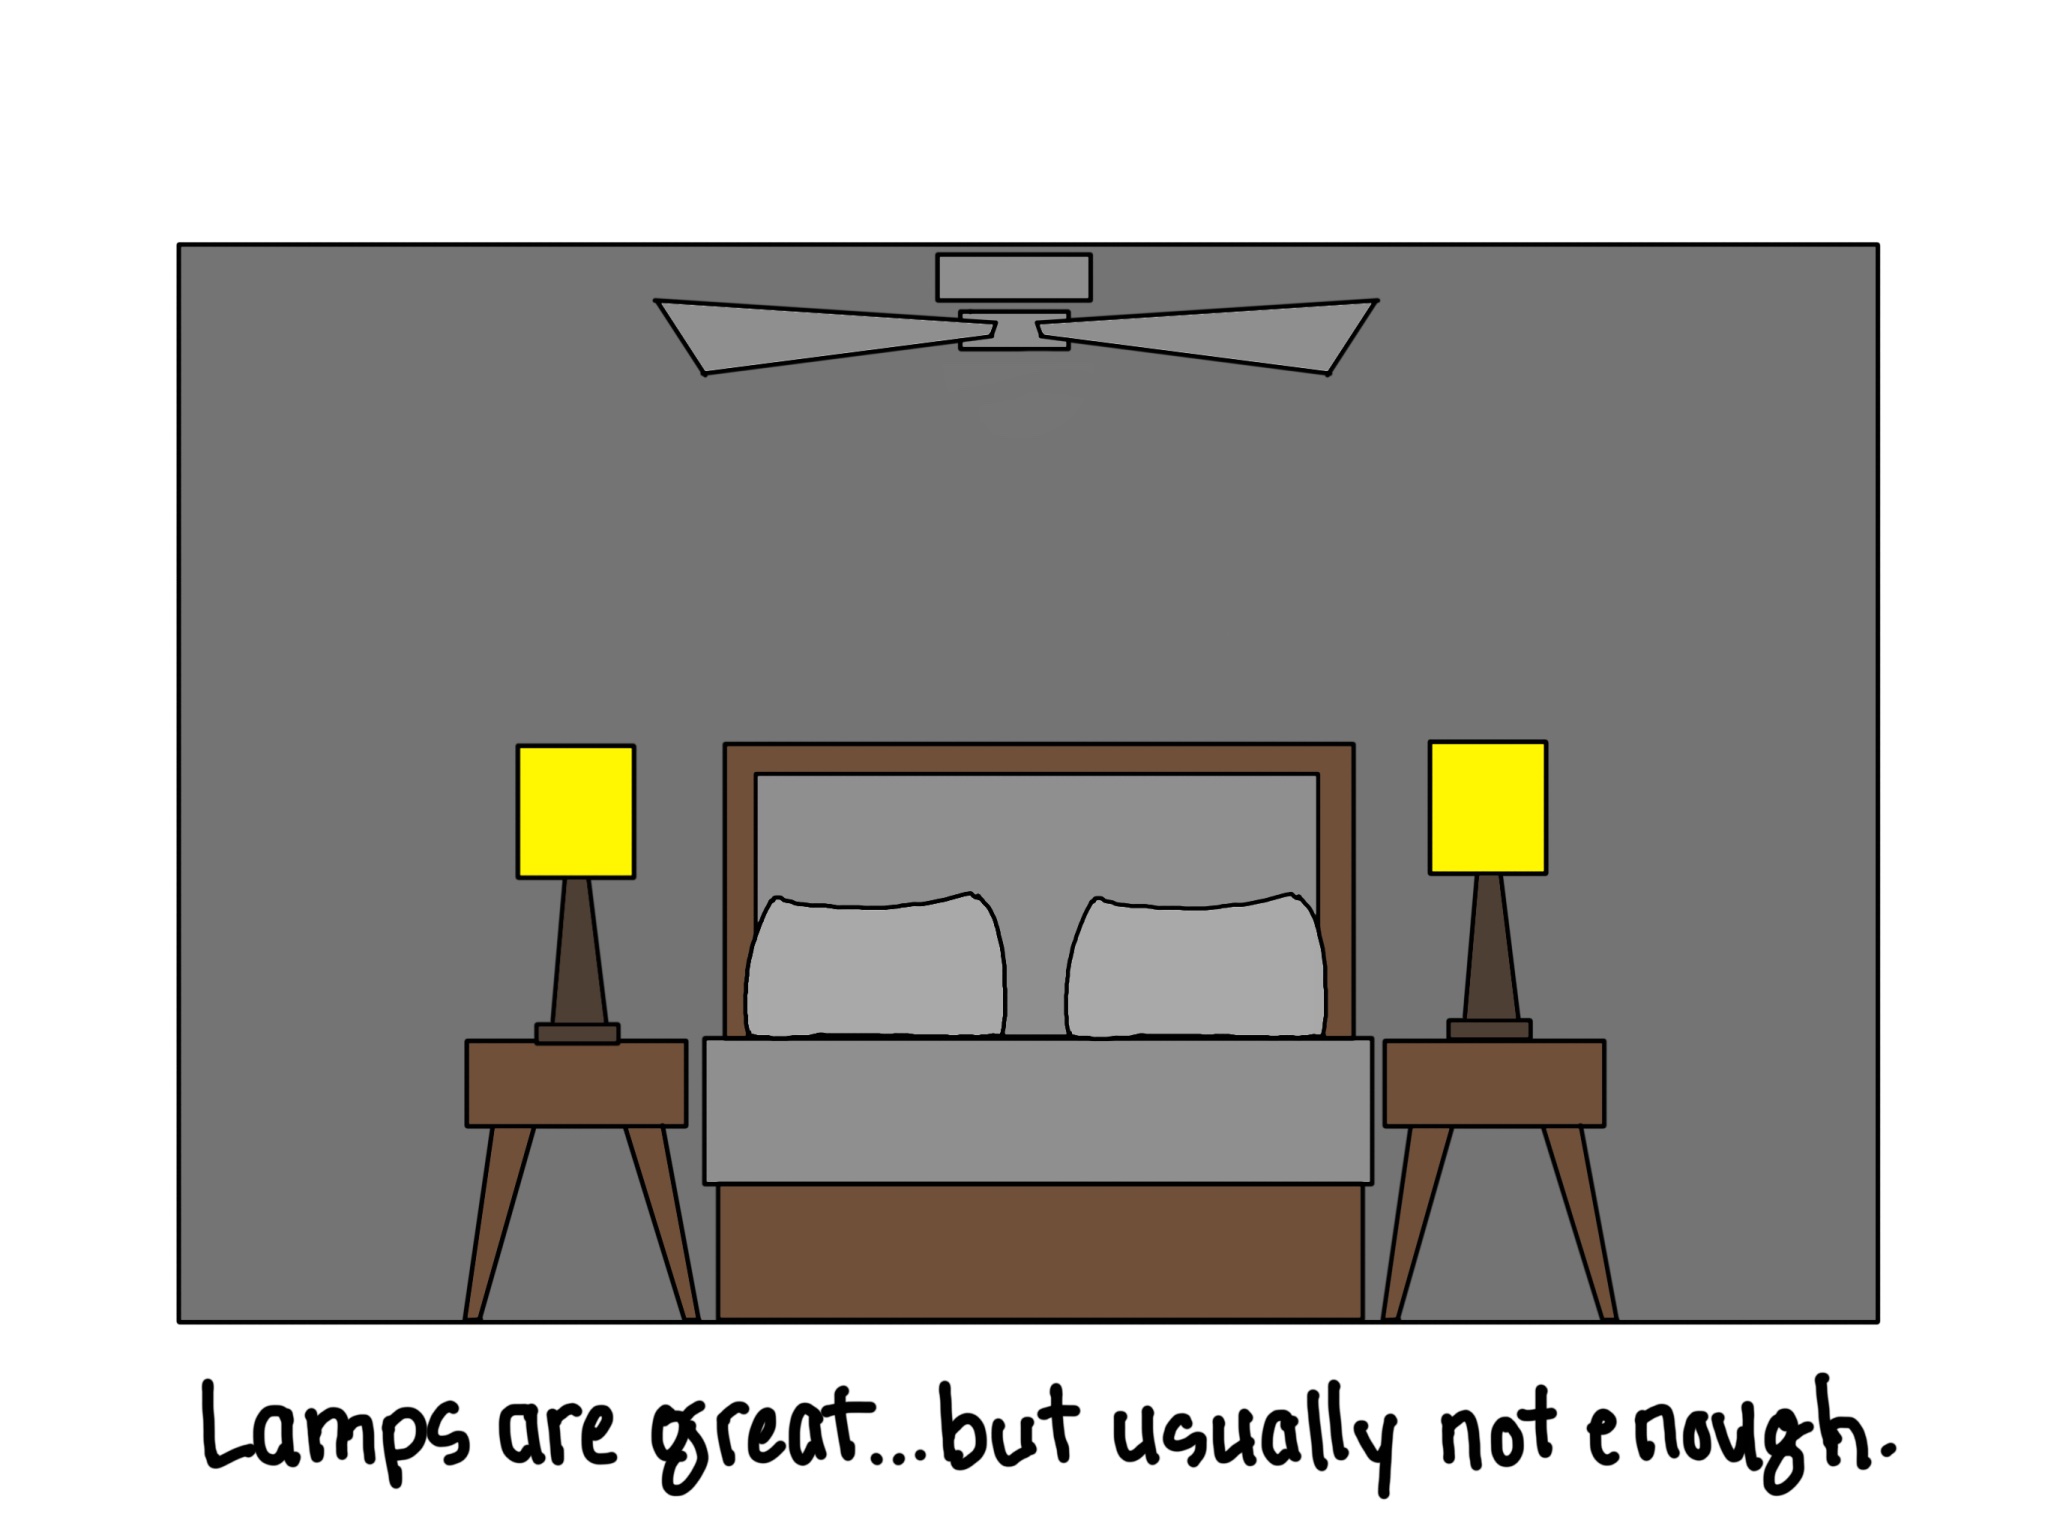 An illustrated depiction of a bedroom featuring a bed fit for two, two lamps on either side, and a ceiling fan. Script text at the bottom reads "Lamps are great...but usually not enough."